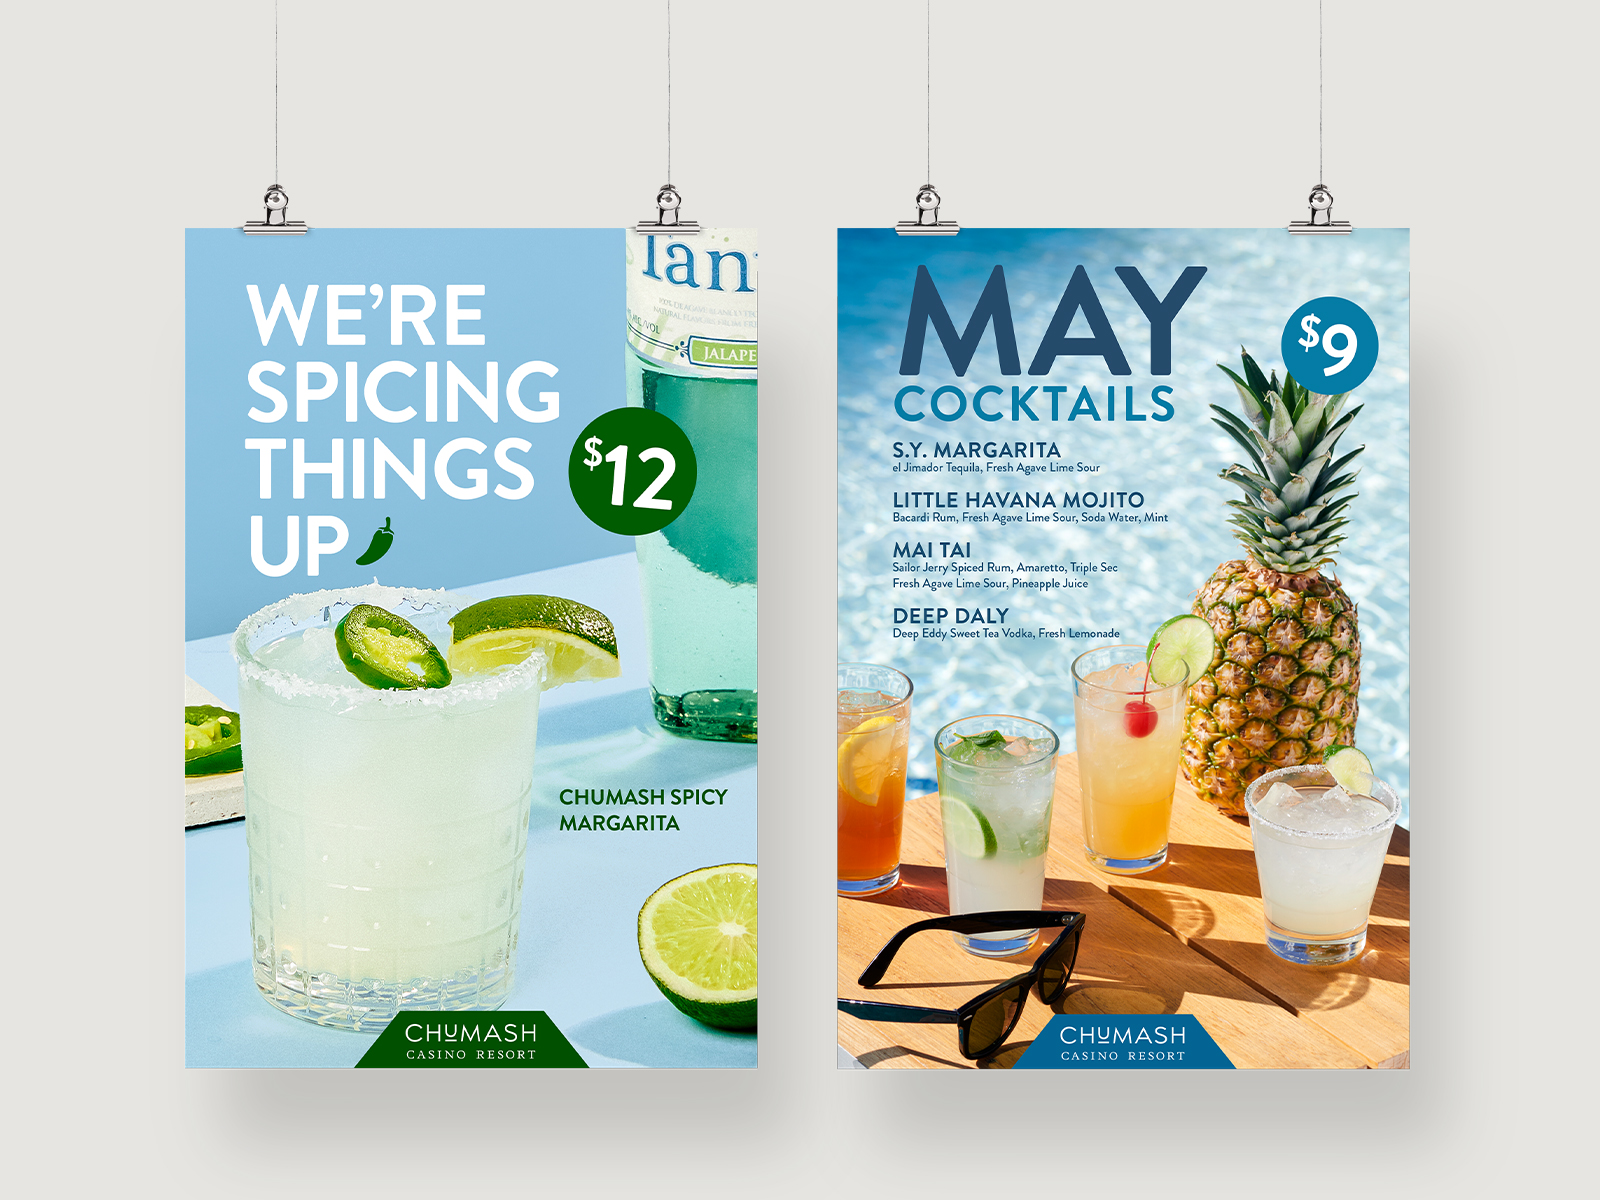 Drinks of the Month Campaign